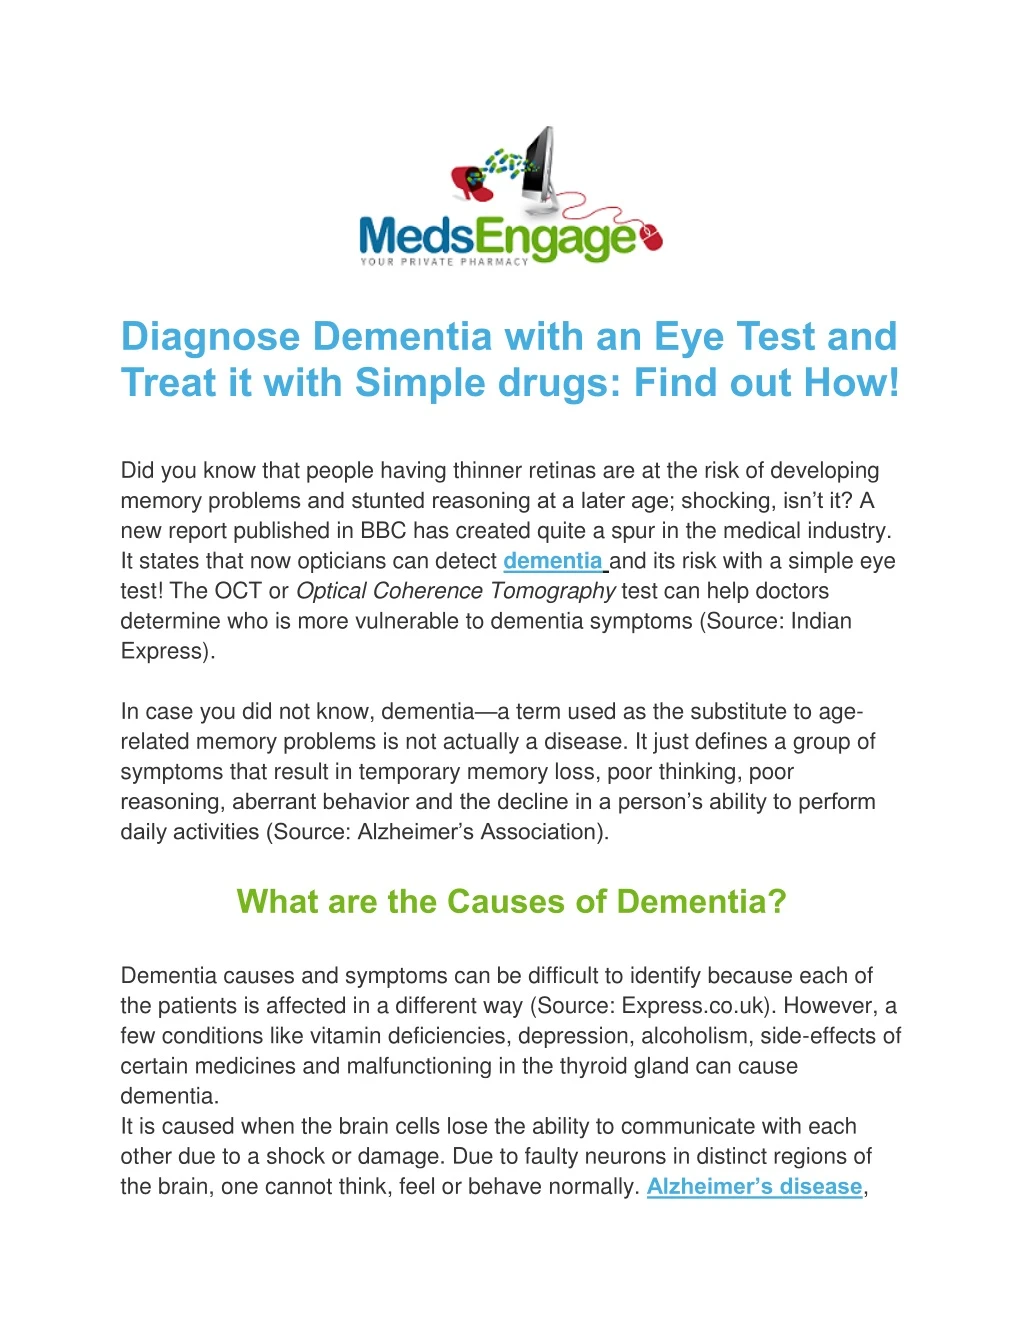 diagnose dementia with an eye test and treat